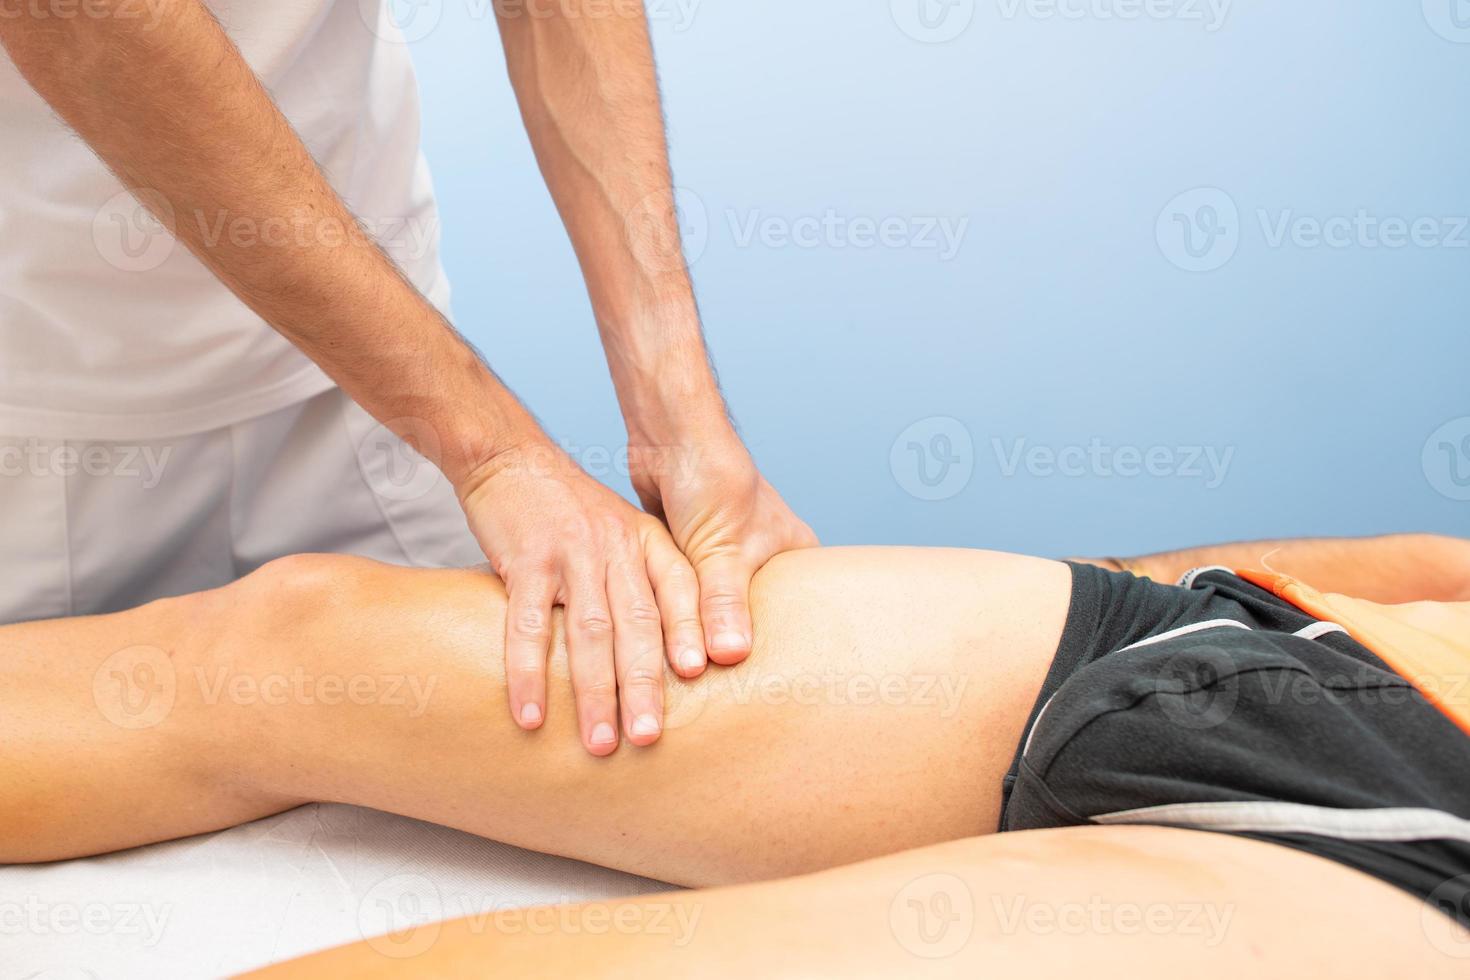 Quadriceps massage to an athlete by a physiotherapist photo